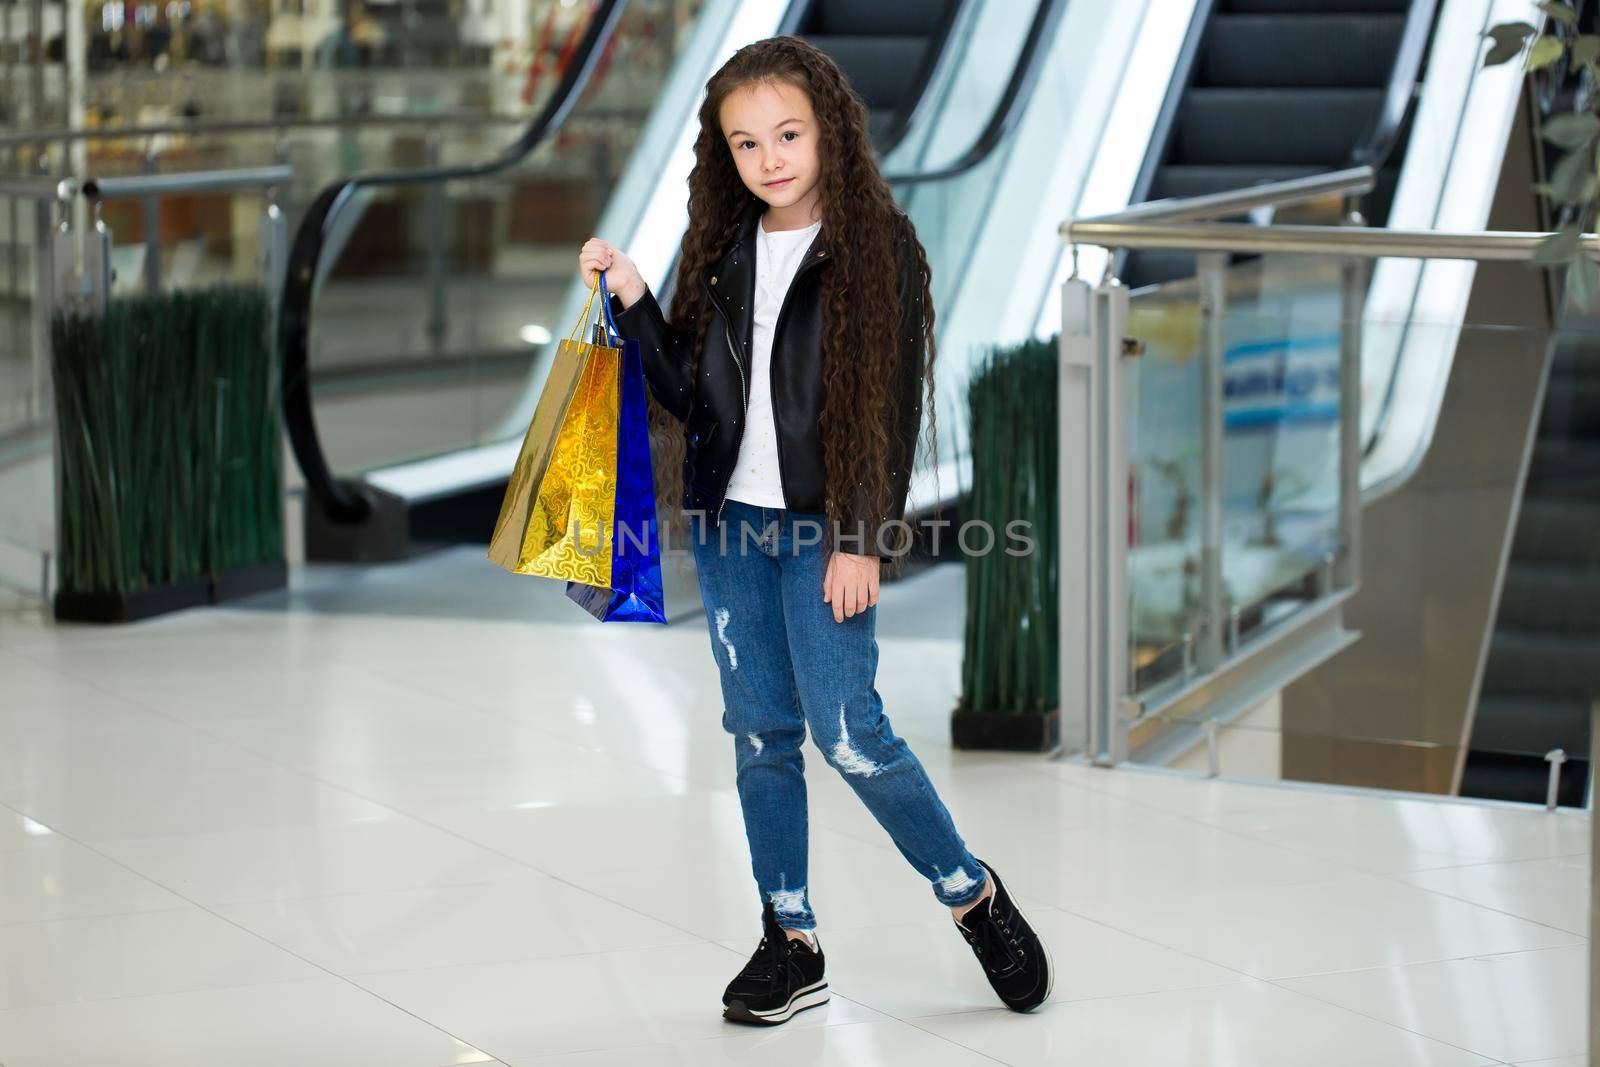 The happy child with color packages on the escalator, in shop of shopping center. by StudioPeace